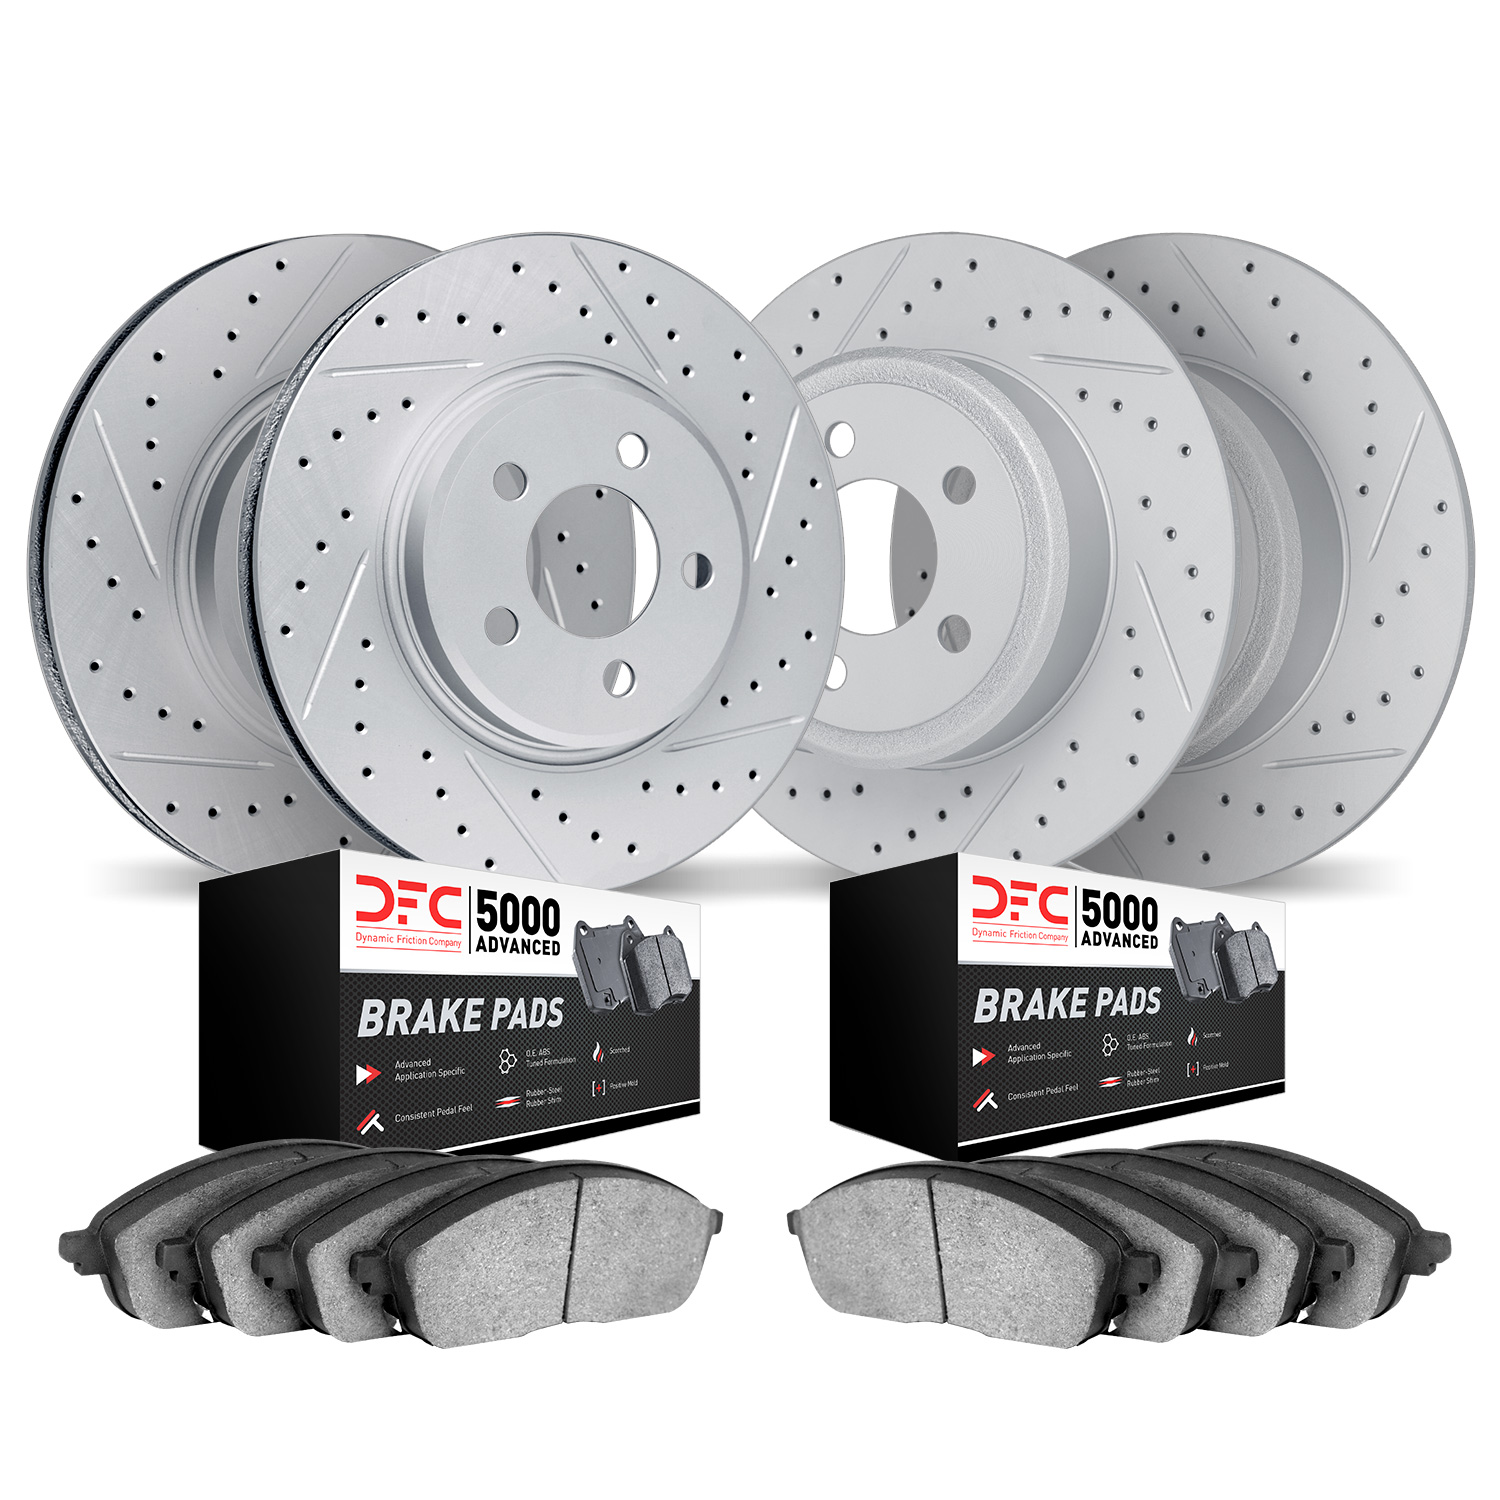 2504-59048 Geoperformance Drilled/Slotted Rotors w/5000 Advanced Brake Pads Kit, 2018-2020 Acura/Honda, Position: Front and Rear